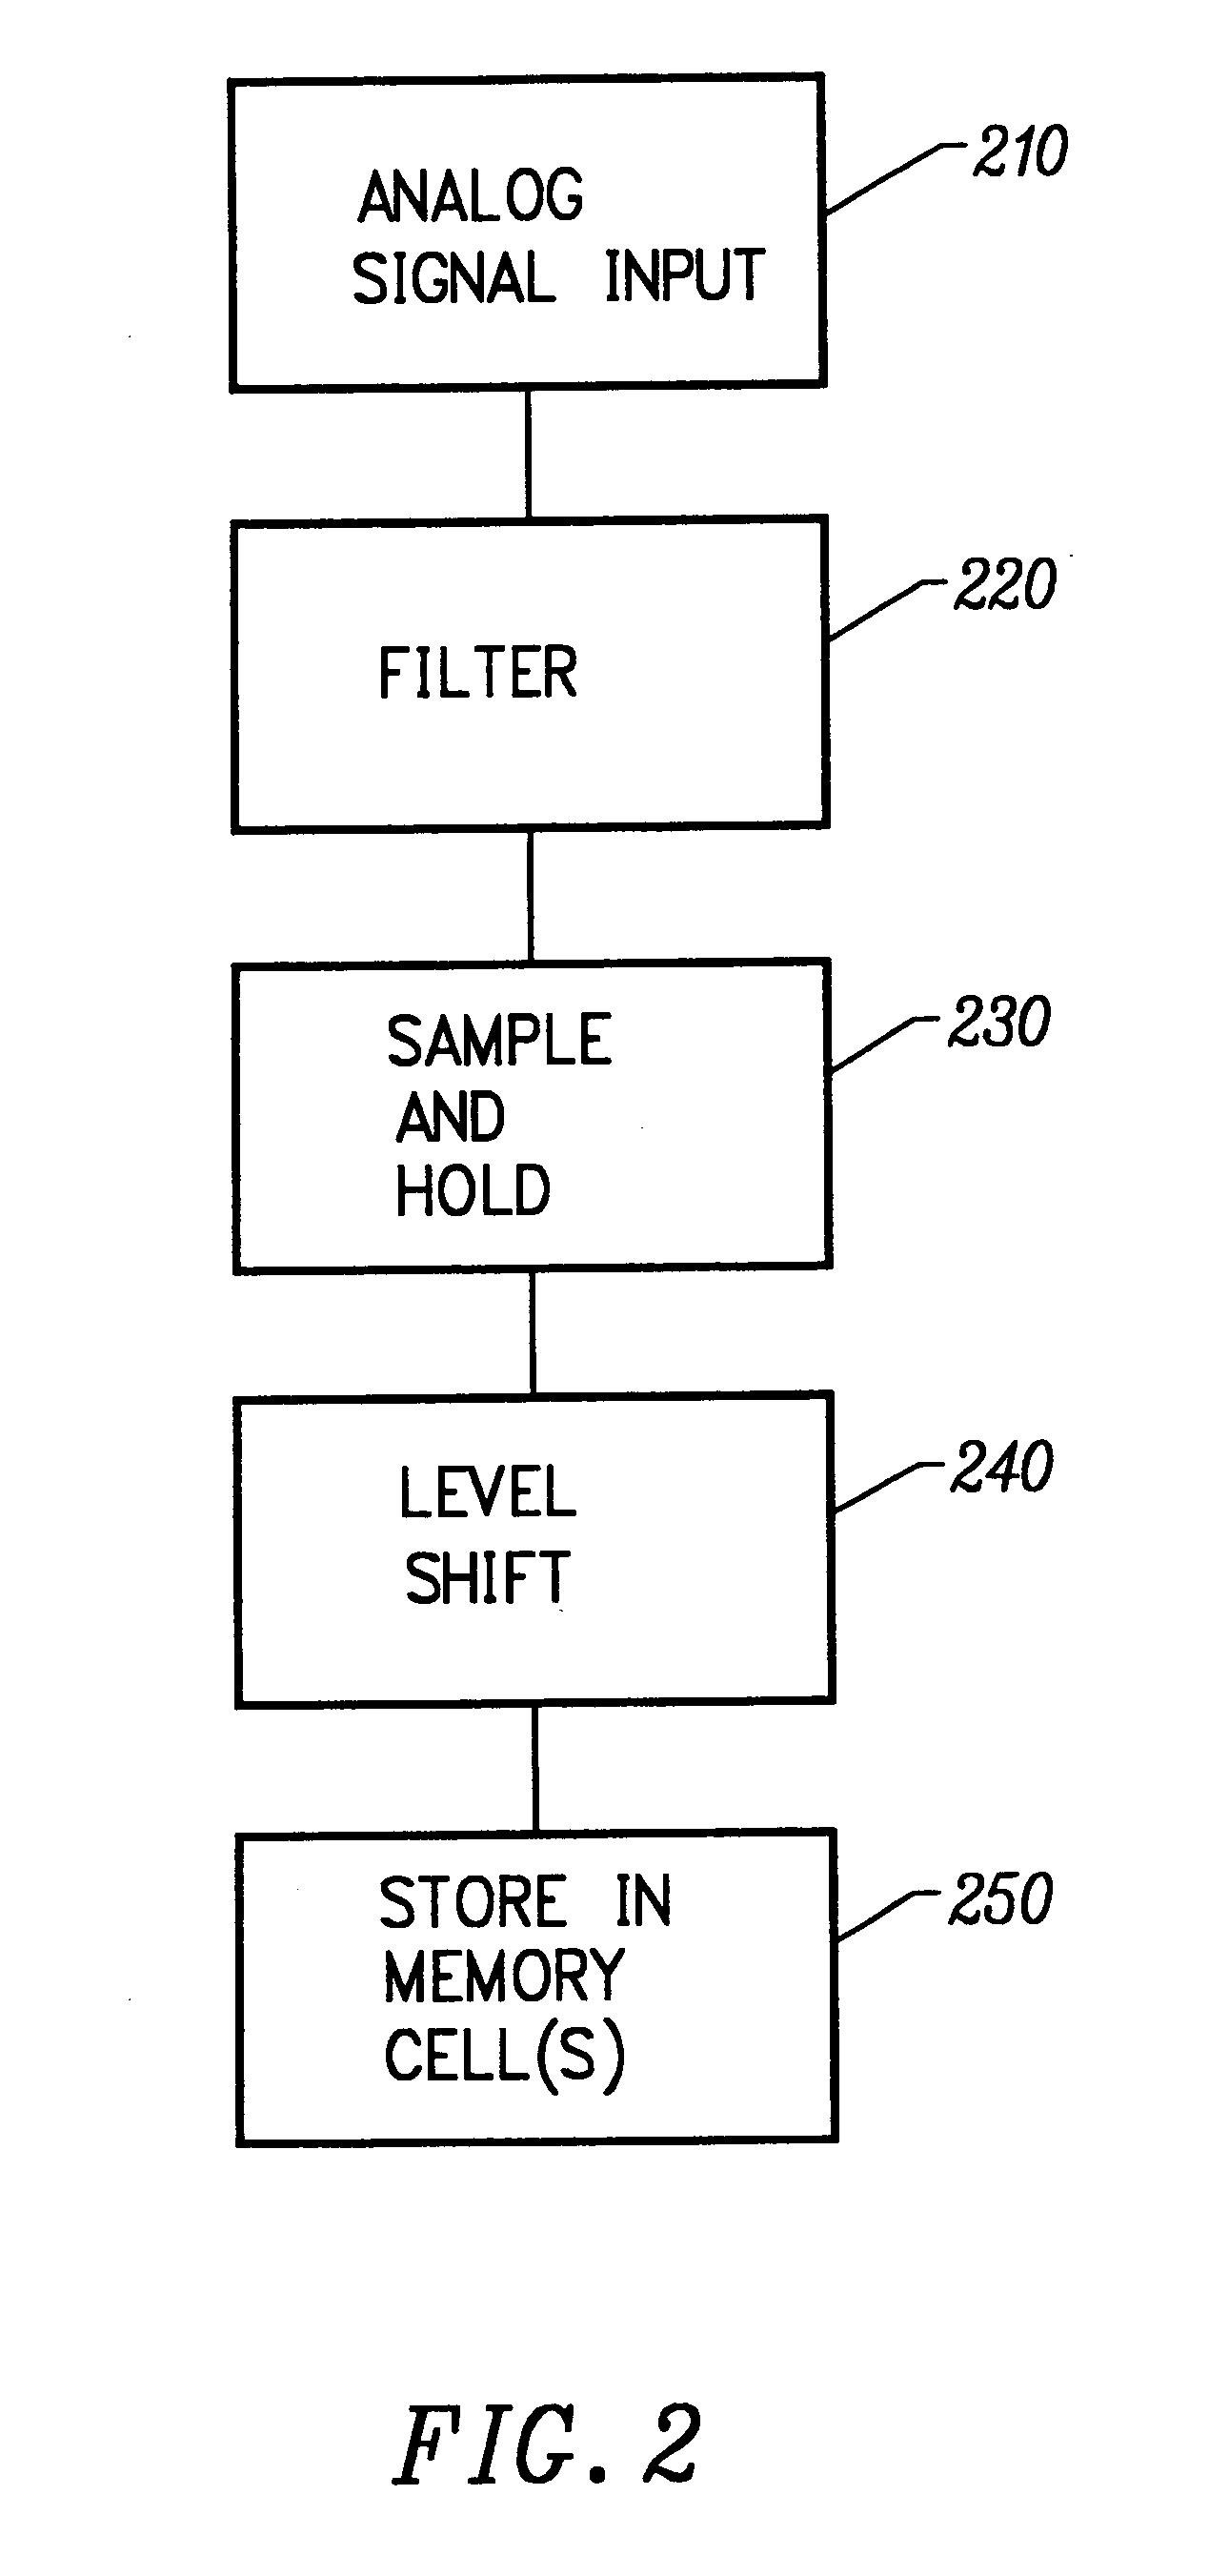 Analog memory IC with fully differential signal path